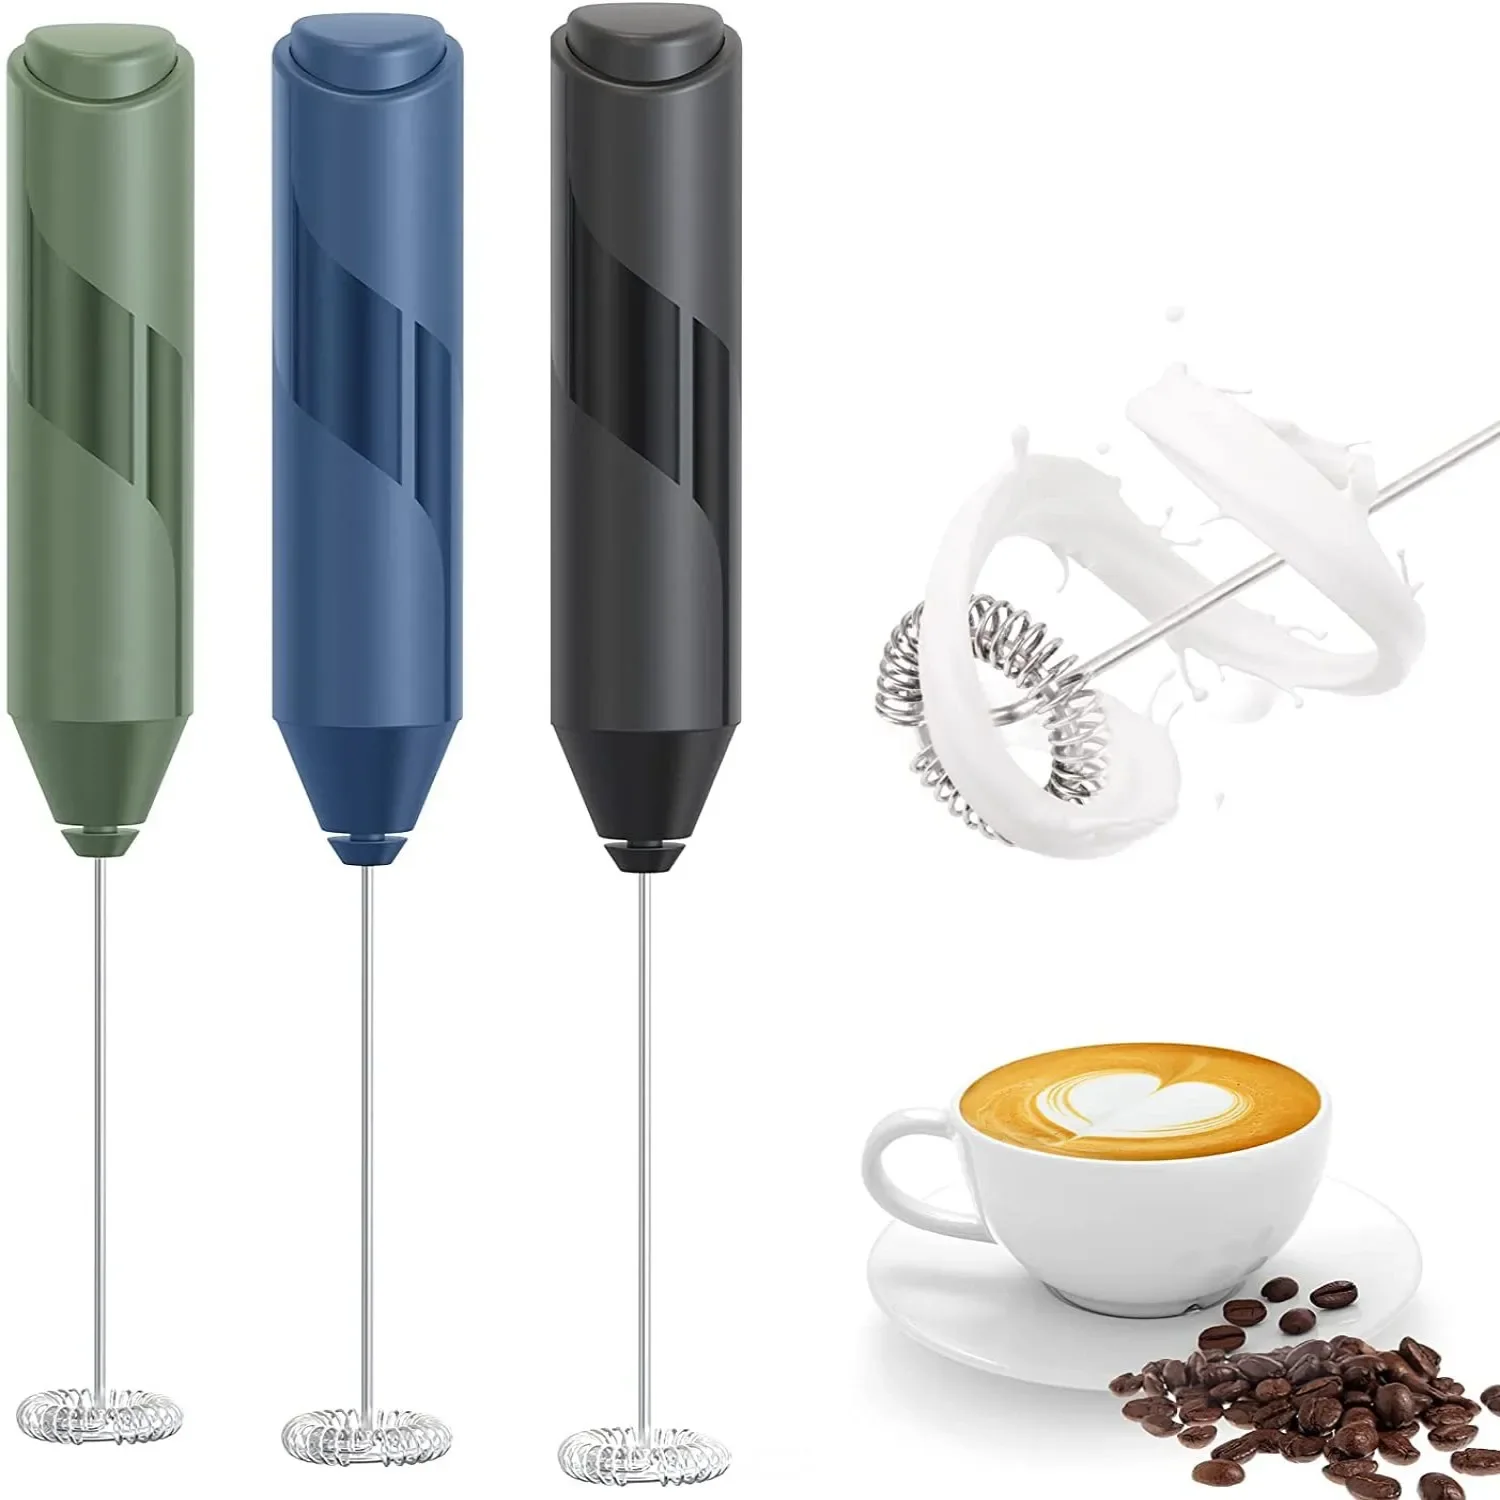  Milk Frother Electric Mixer Coffee - Battery Operated Whisk  Handheld Drink Stirrer Mixing Wand - Mini Coffee Foam Blender Hand Held for  Matcha, Latte, Cappuccino, Frappe, Chocolate: Home & Kitchen